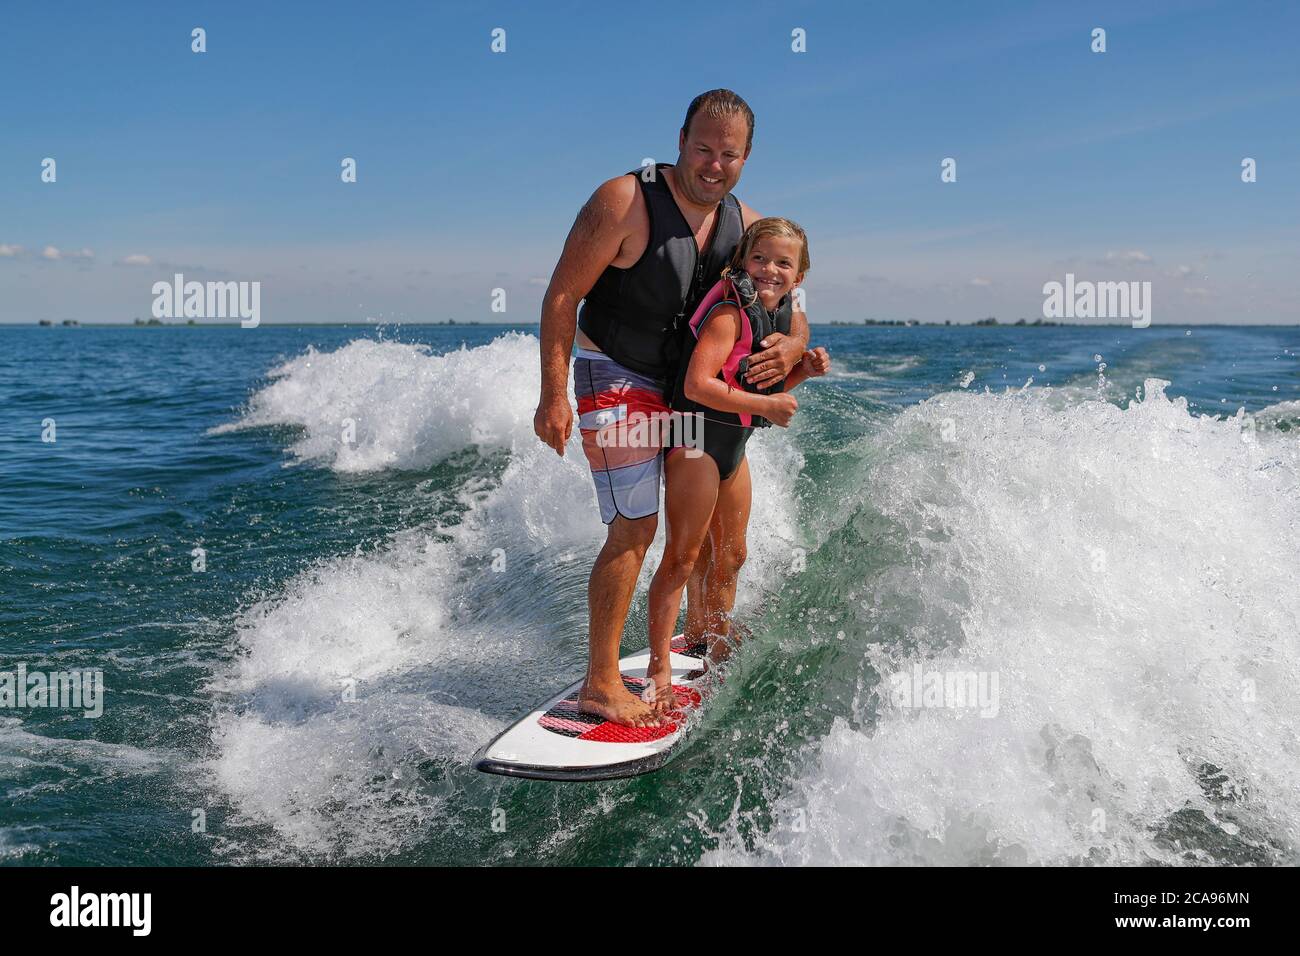 A man and a child together on a surfboard. Stock Photo